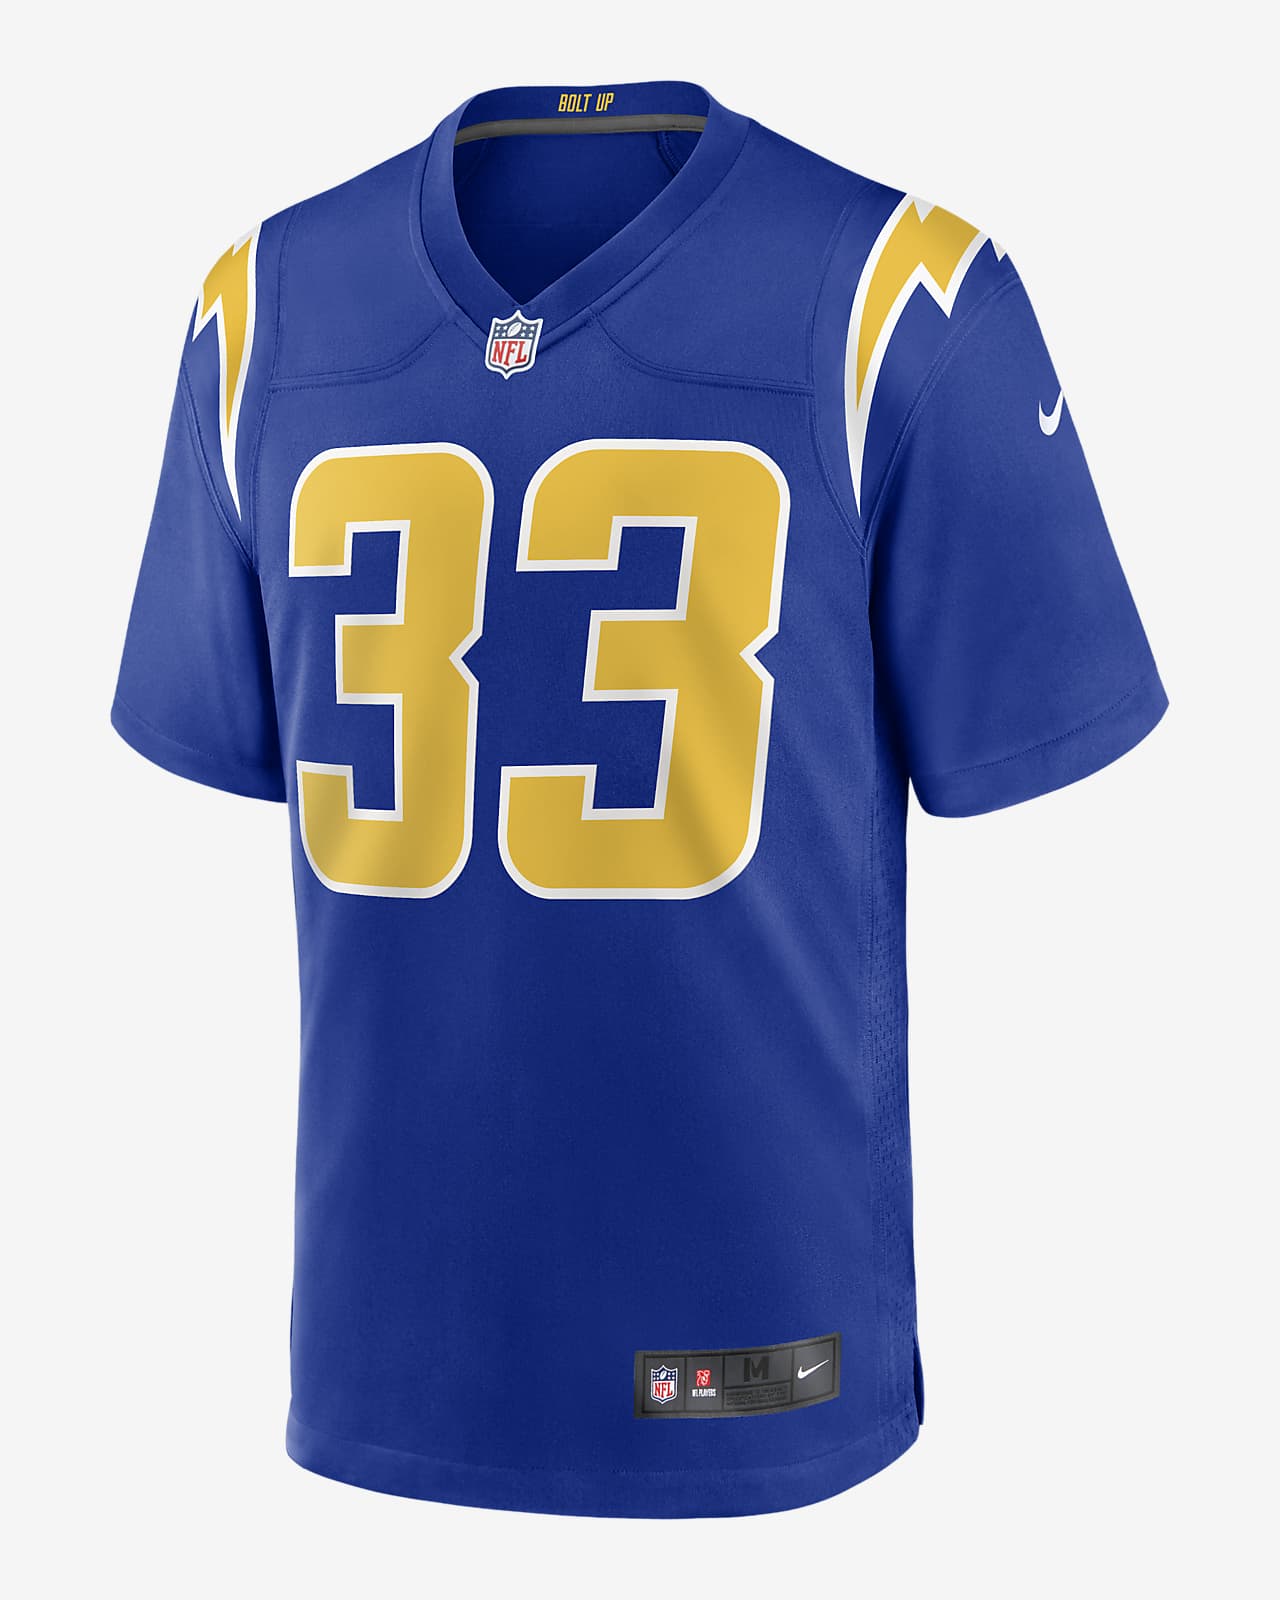 NFL Los Angeles Chargers (Derwin James) Men's Game Football Jersey